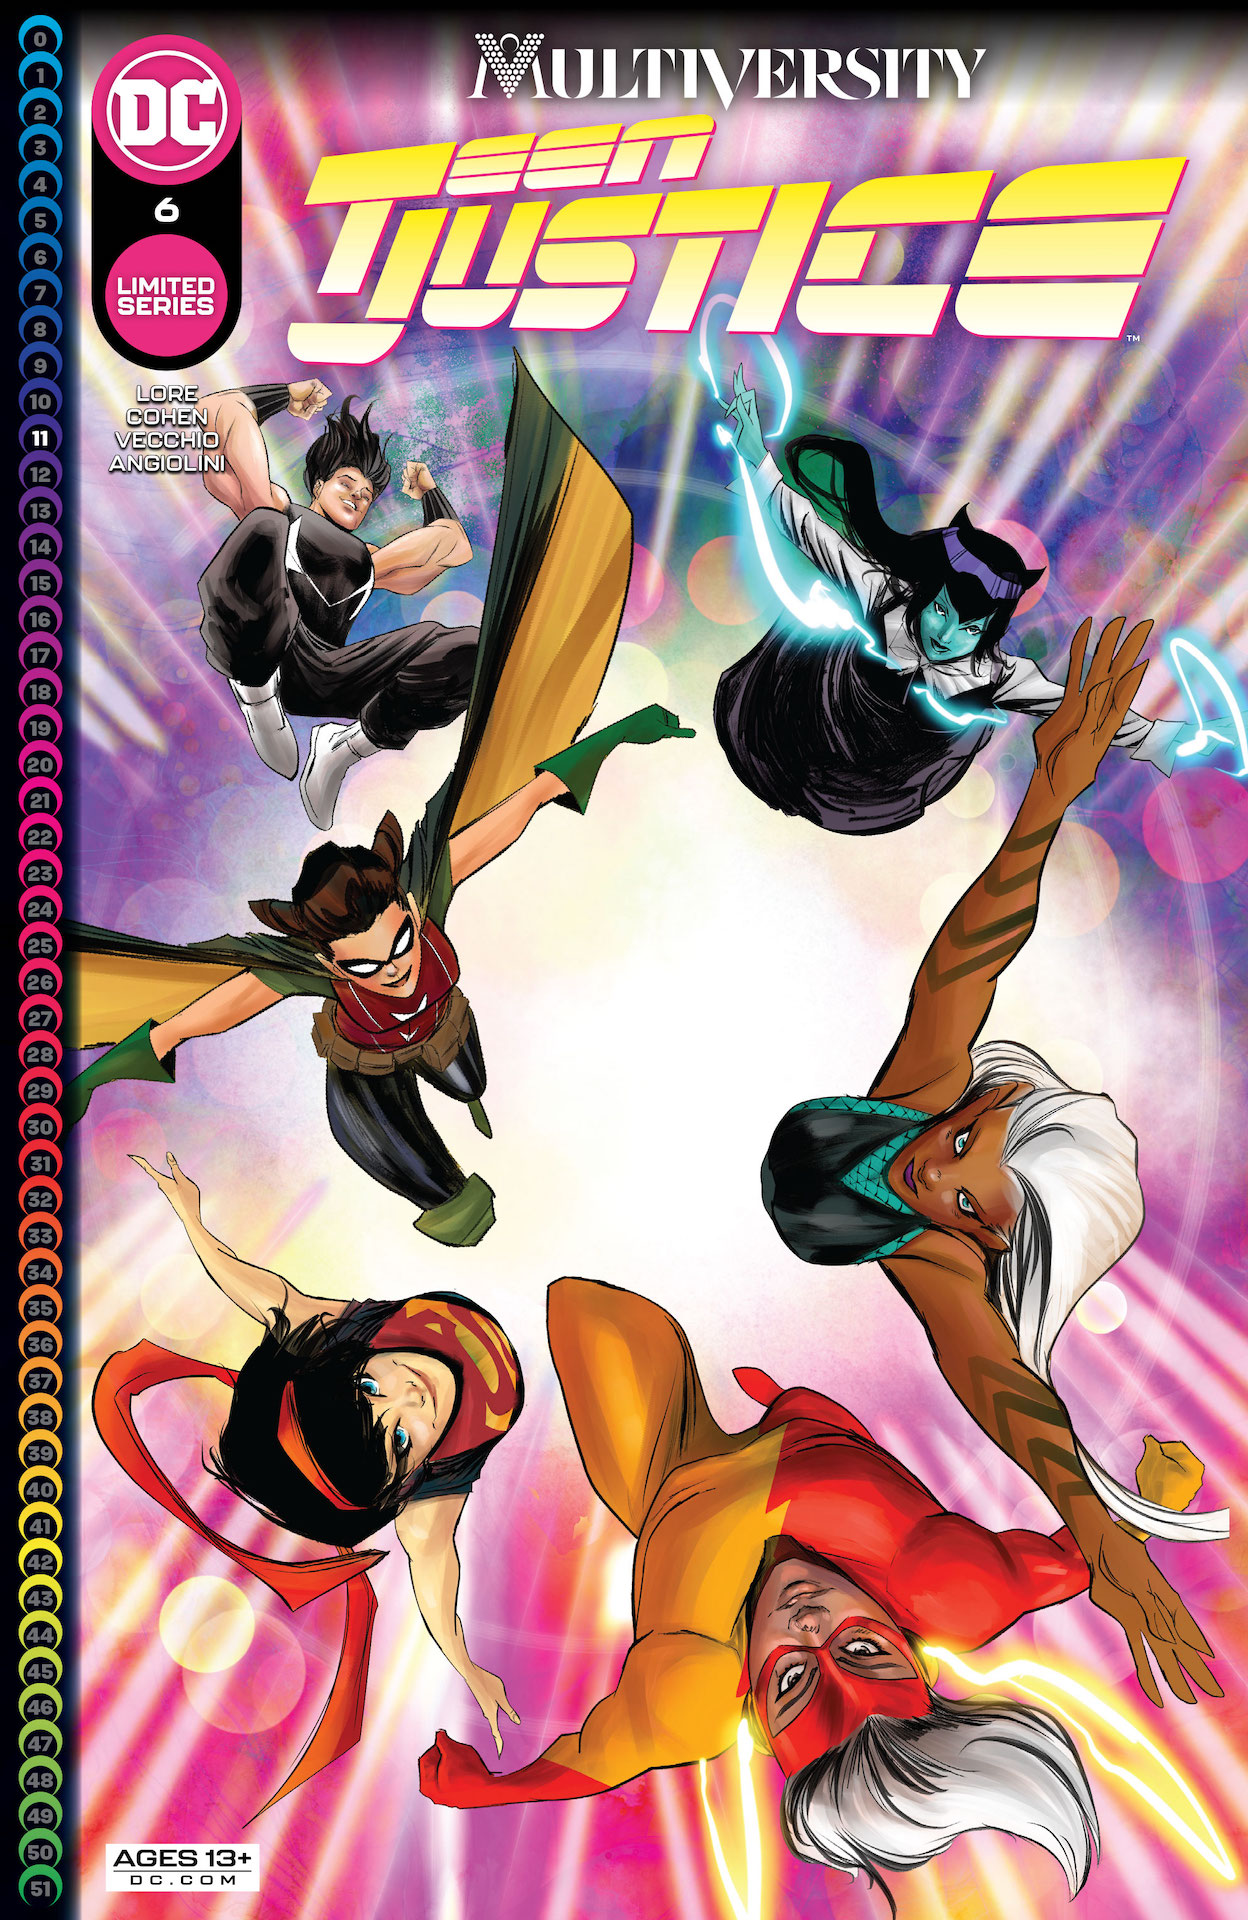 DC Preview: Multiversity: Teen Justice #6